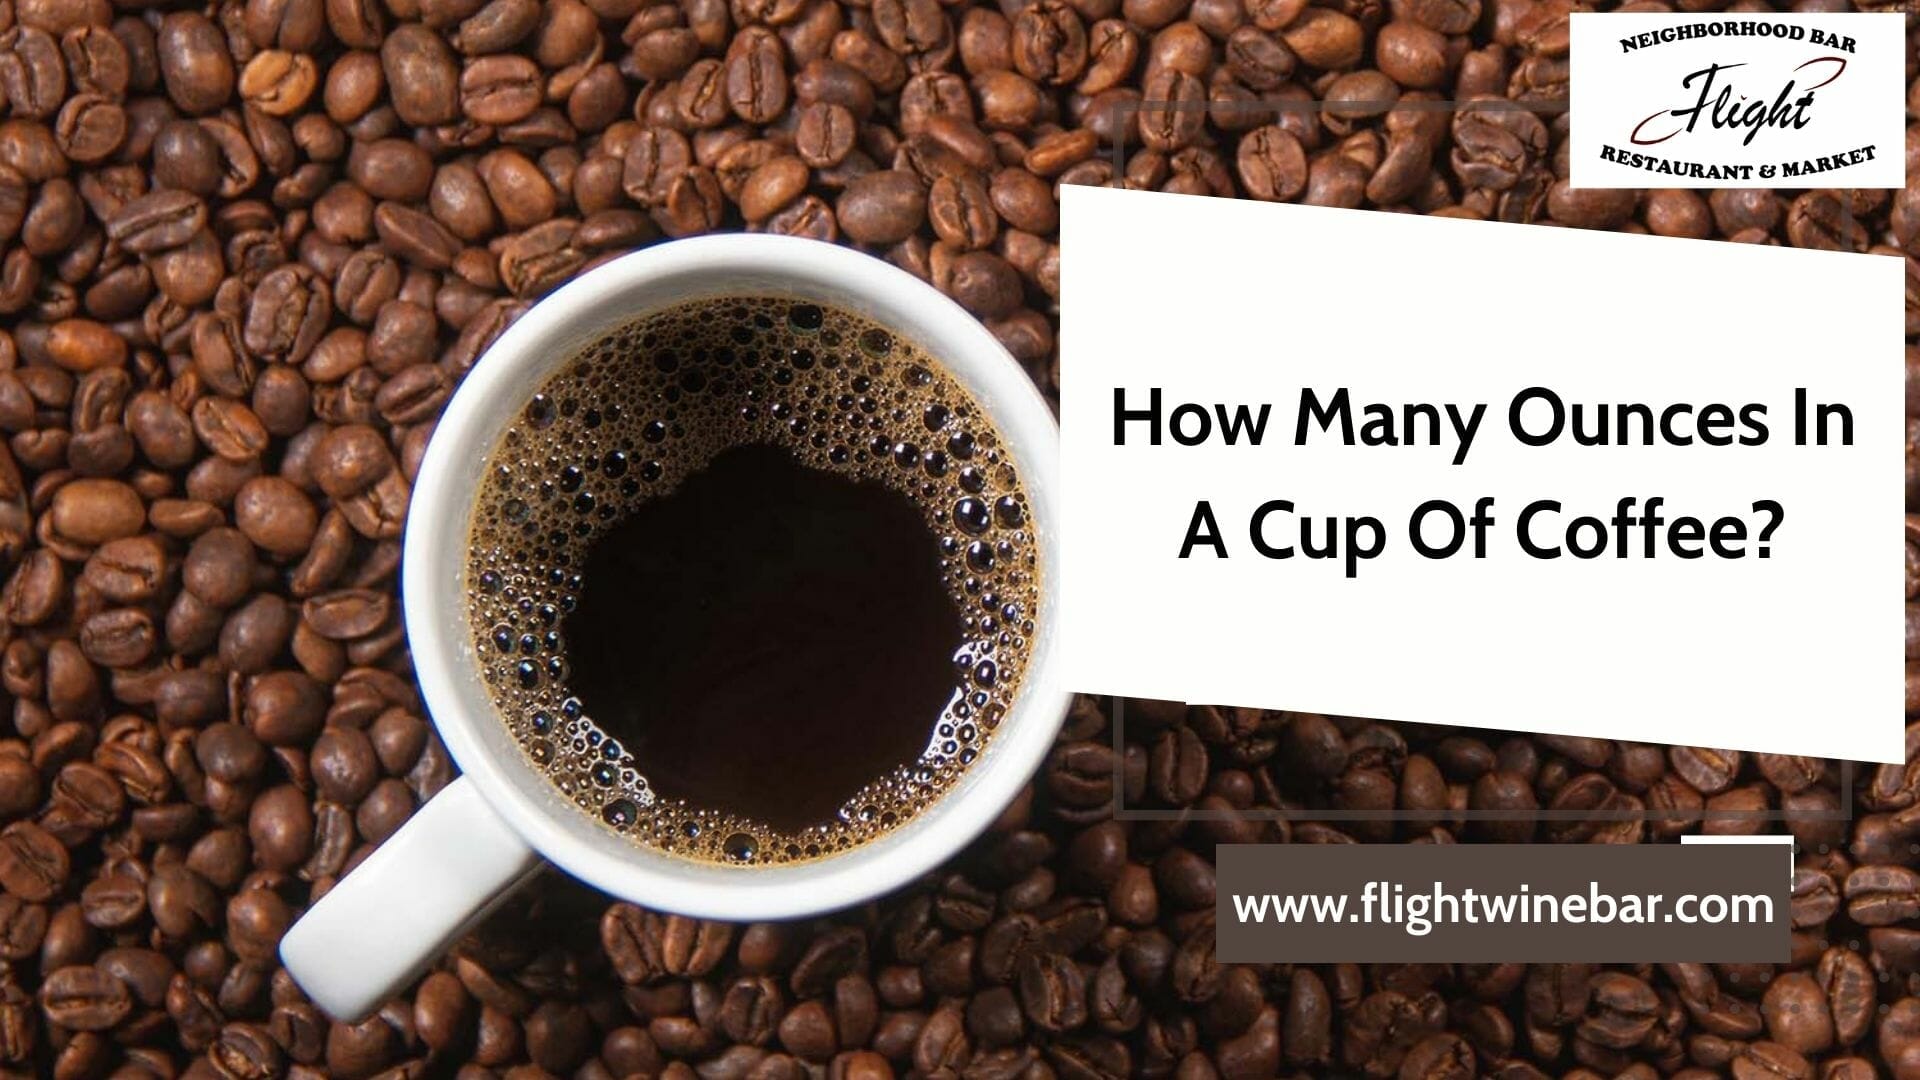 How Many Ounces In A Cup Of Coffee